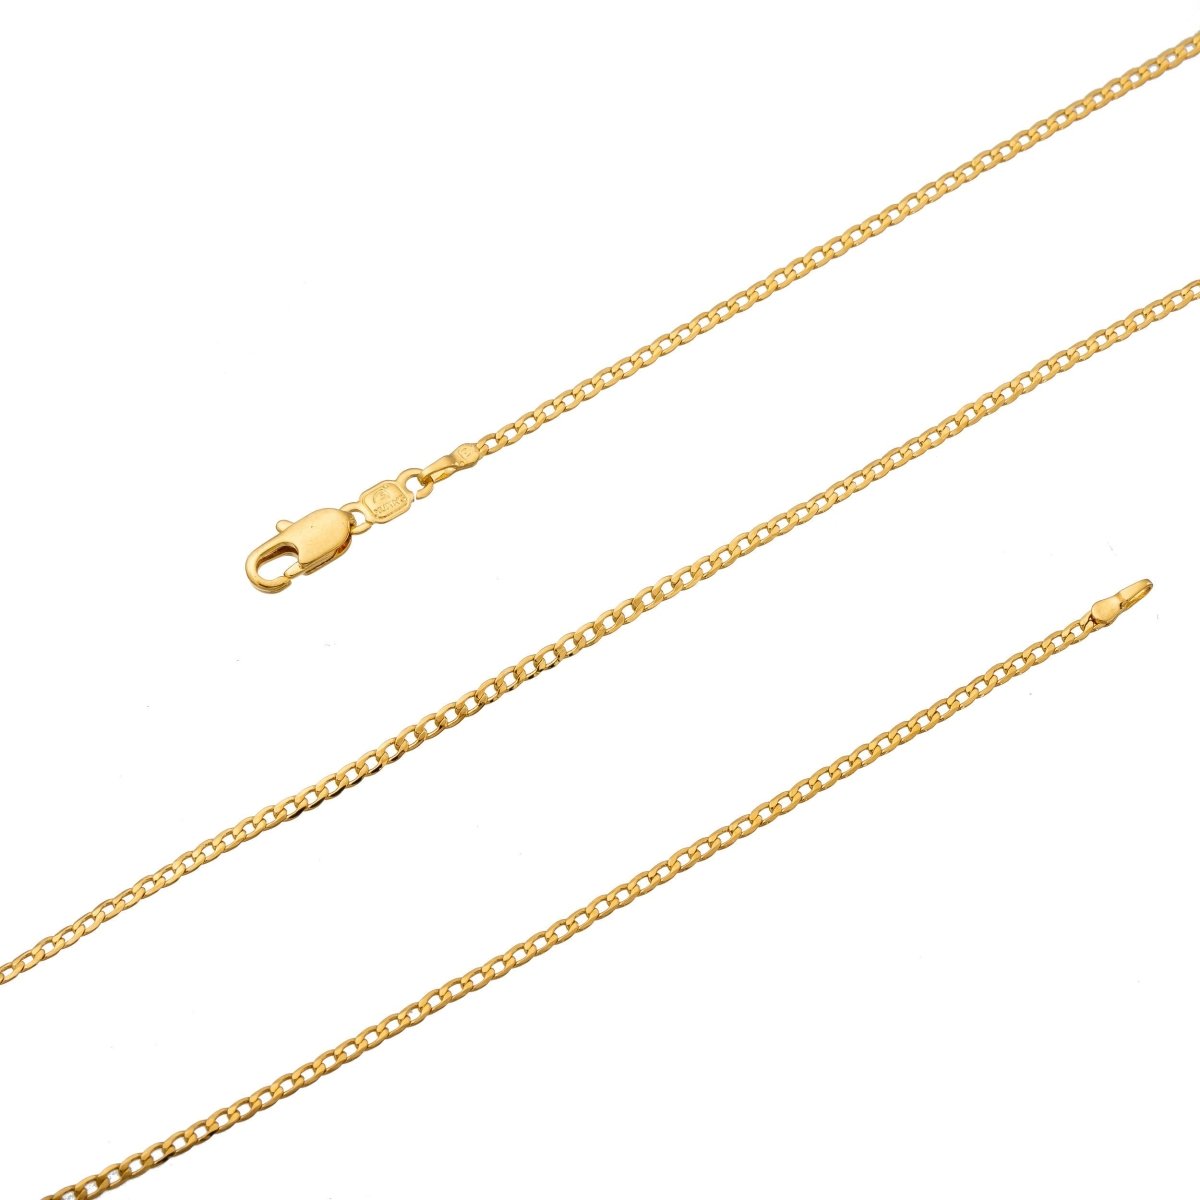 24K Gold Filled Necklace - Curb Necklace - Dainty Gold Curb Chain Layering Necklace 2.5mm 19.5 inch ready to wear w/ Lobster Clasp | CN-199 - DLUXCA